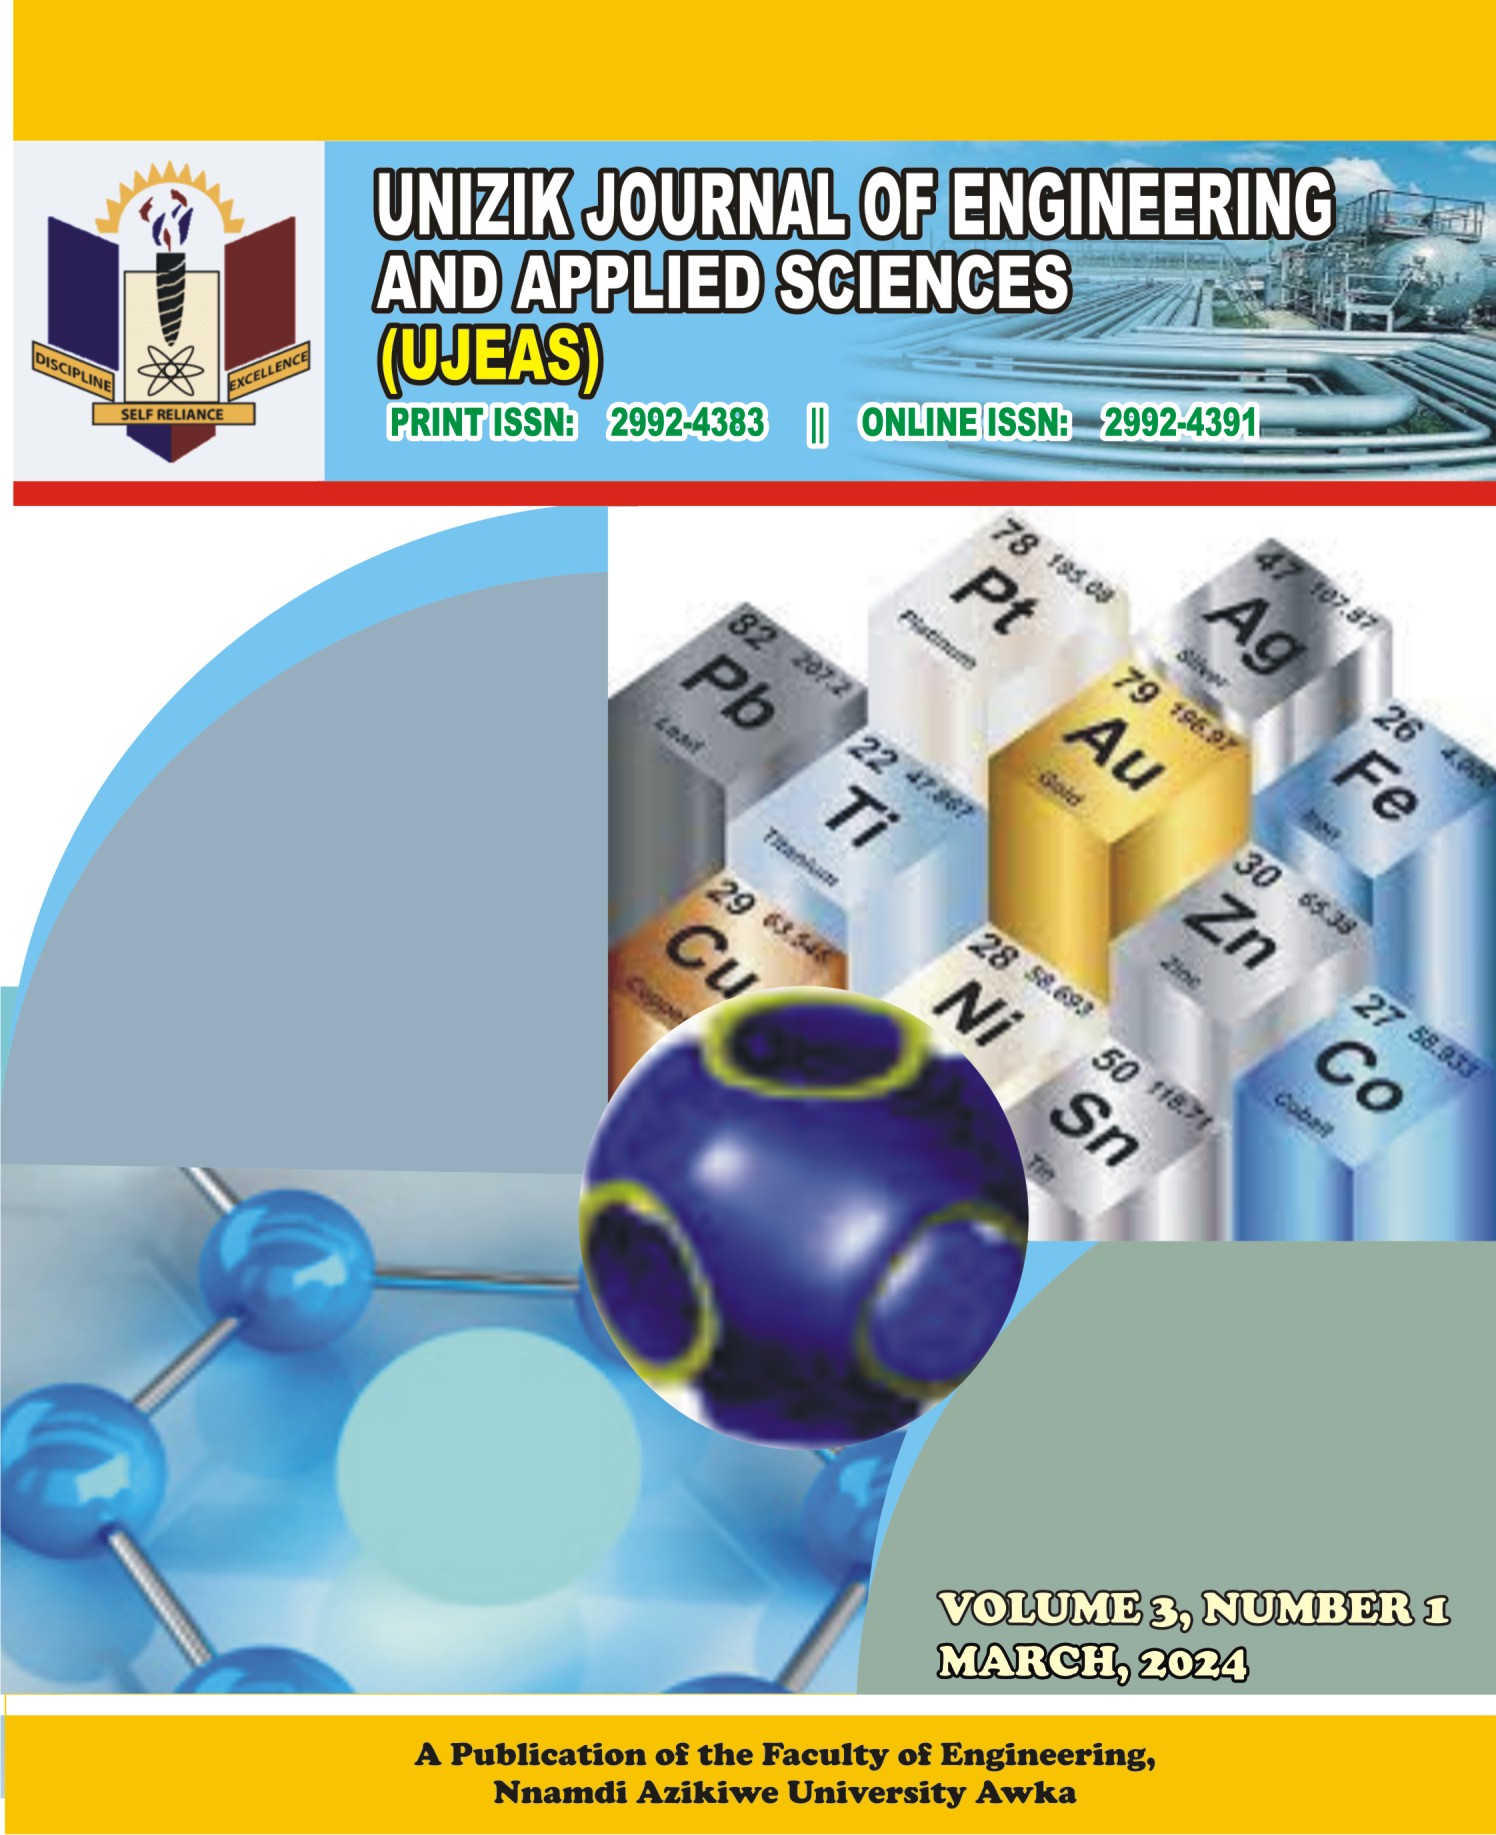 					View Vol. 3 No. 1 (2024): UNIZIK Journal of Engineering and Applied Sciences
				